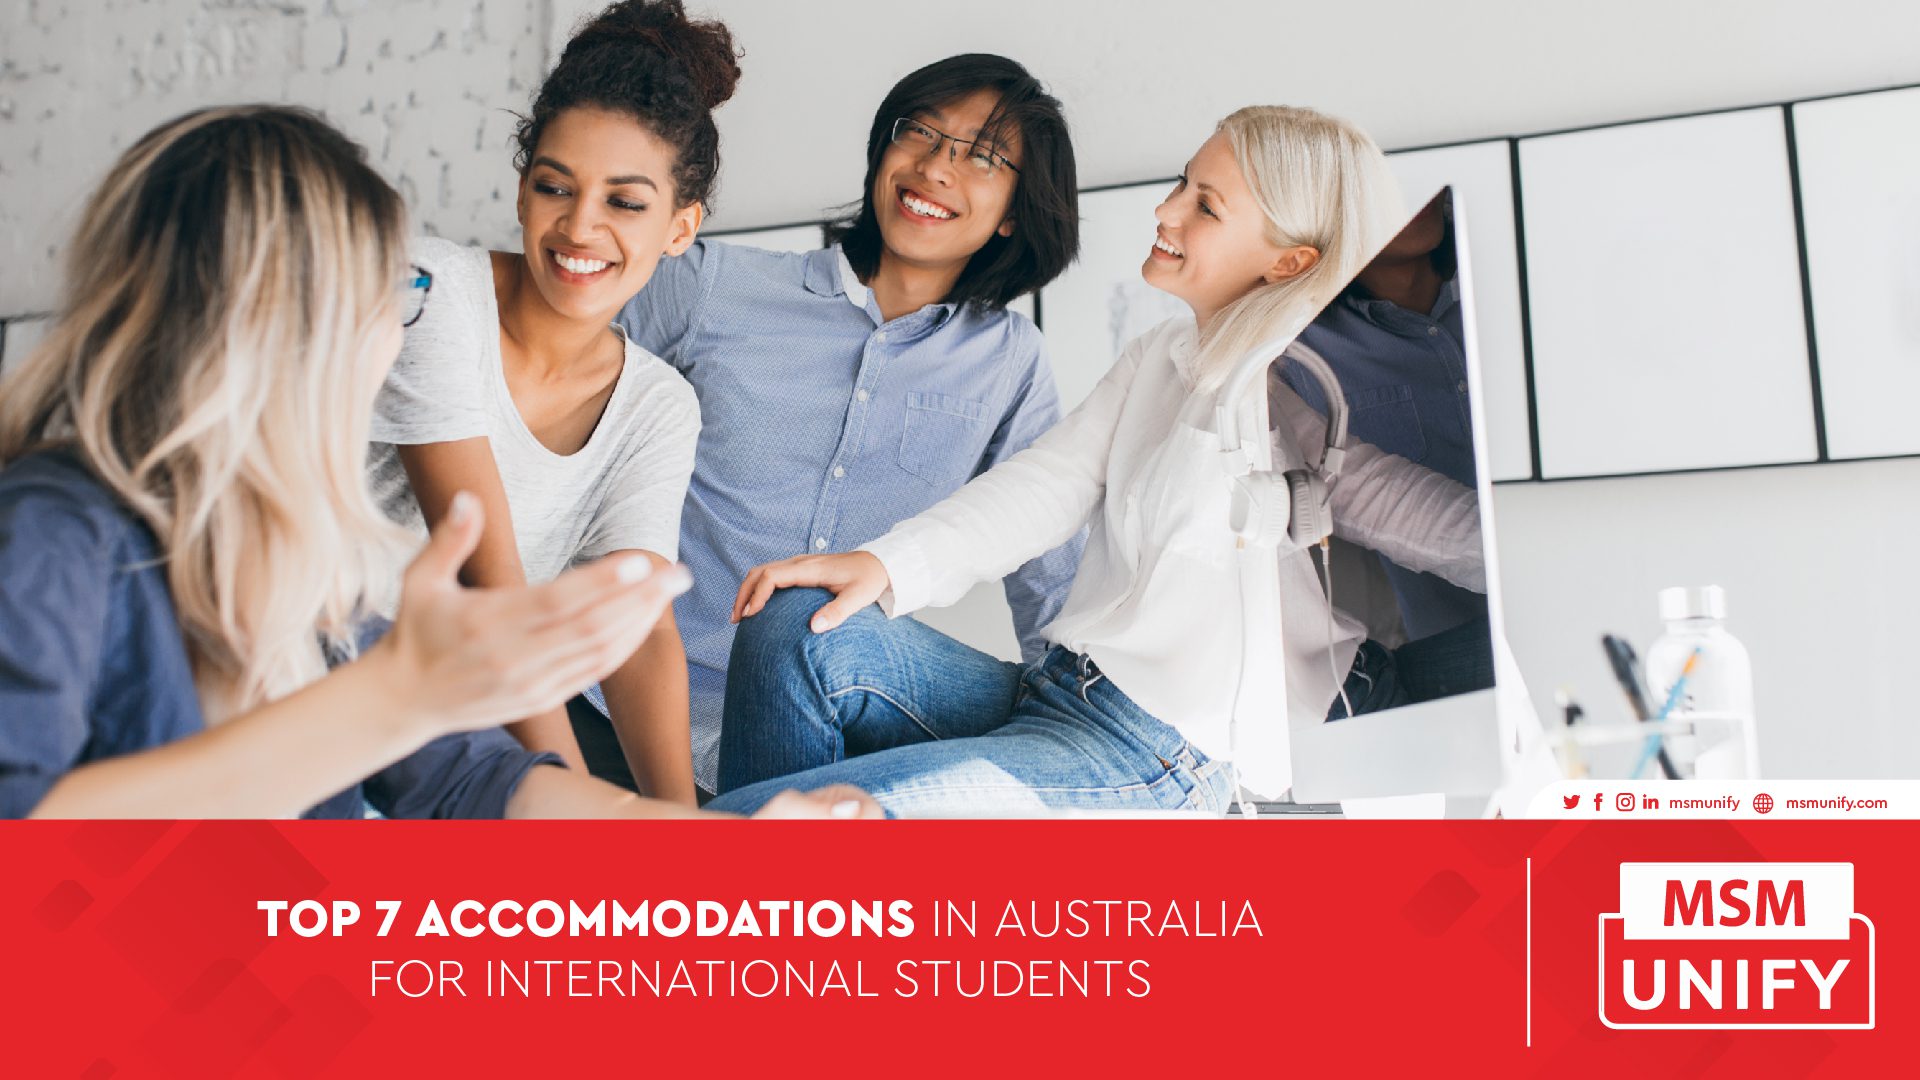 111022 MSM Unify  Top 7 Accommodations in Australia for International Students 01